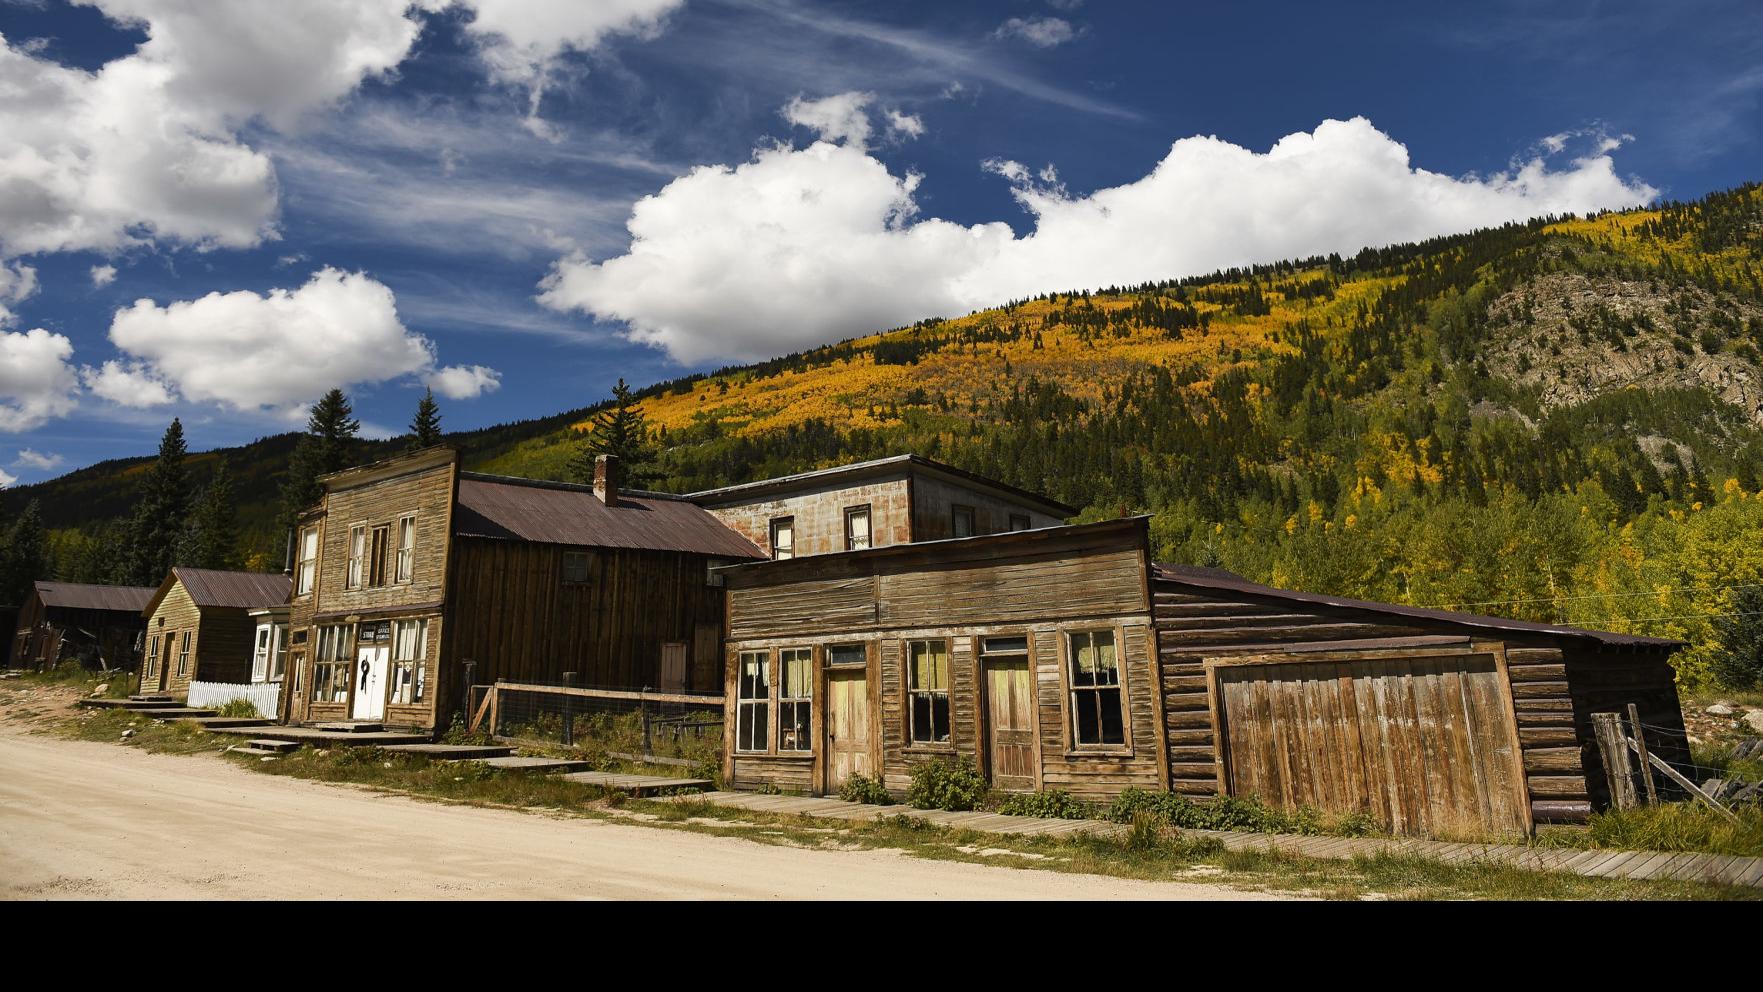 From ghost towns to gold mines: Take a wild 'Wild West' road trip